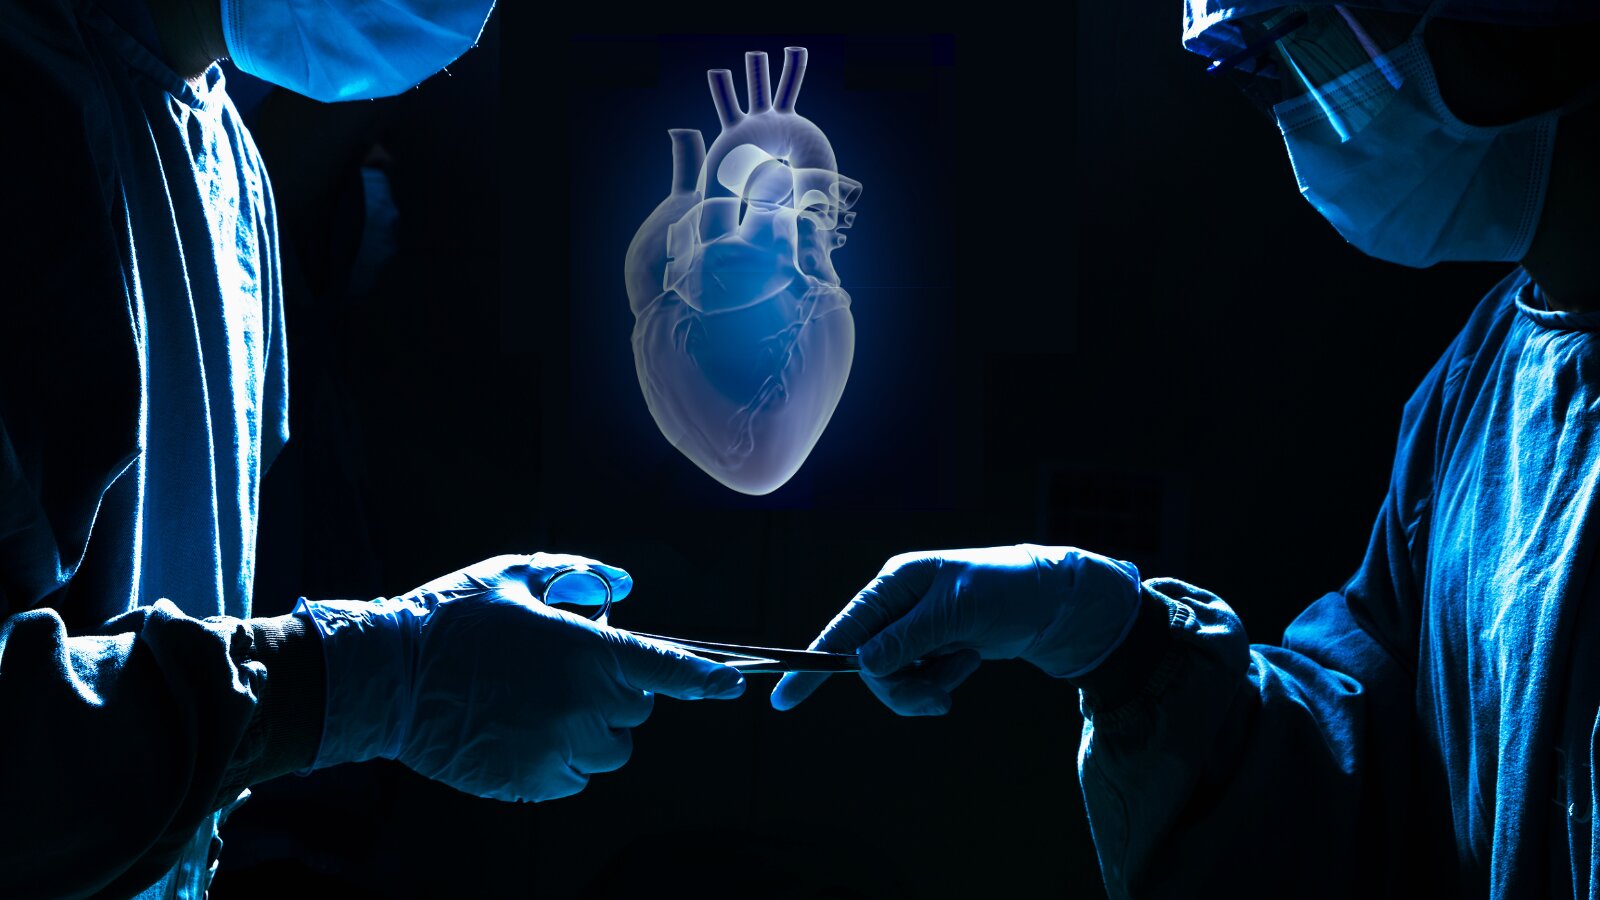 Developing 3D live hologram technology to conserve lives in field hospitals